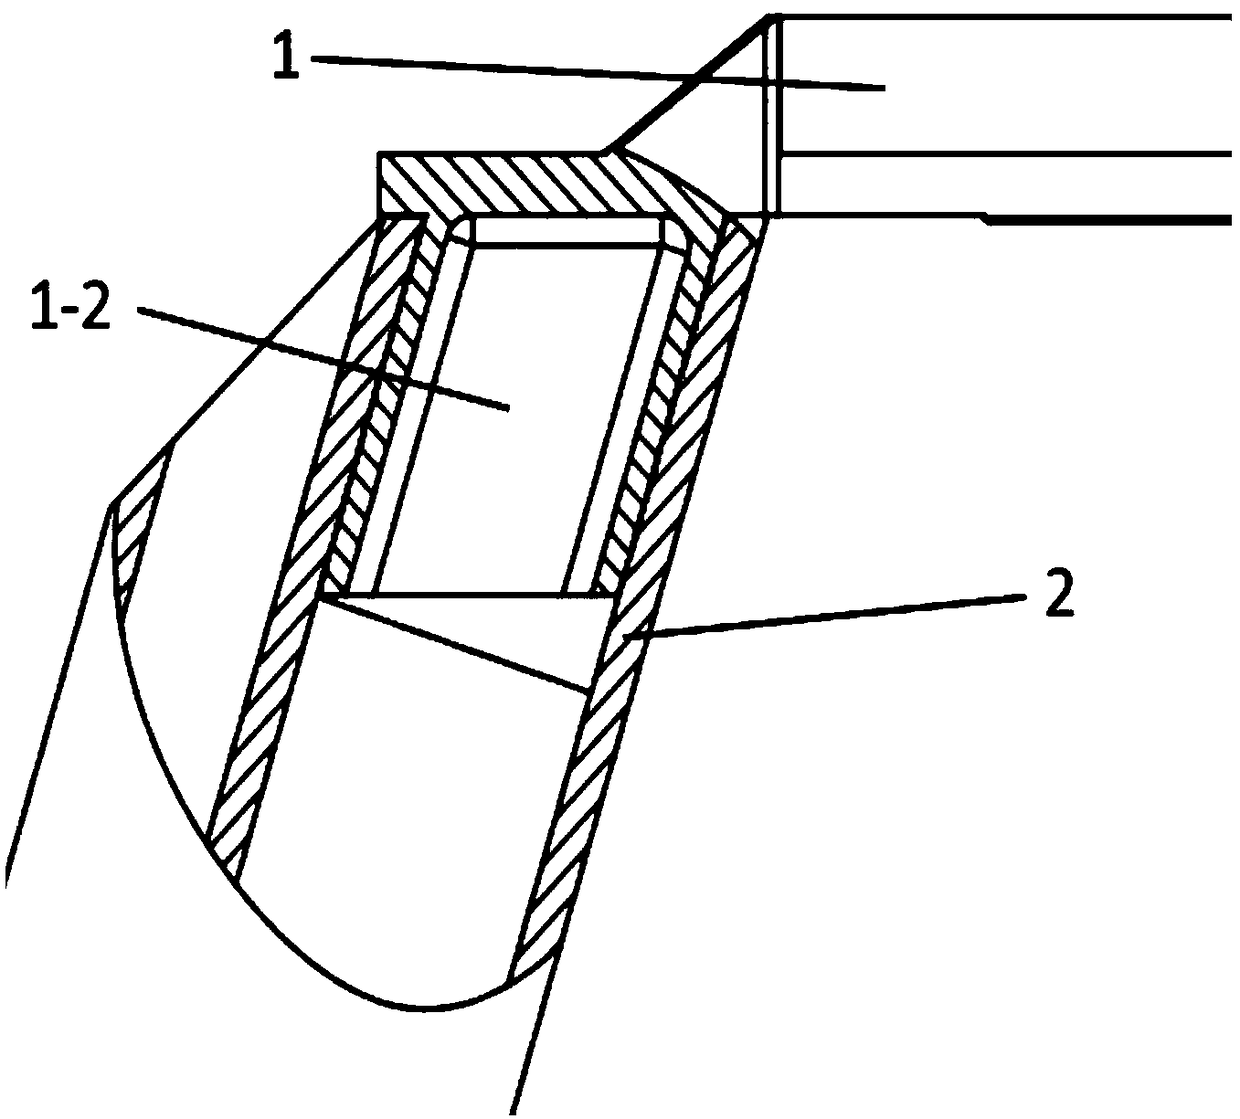 Secondary mirror supporting structure of space optical remote sensing camera